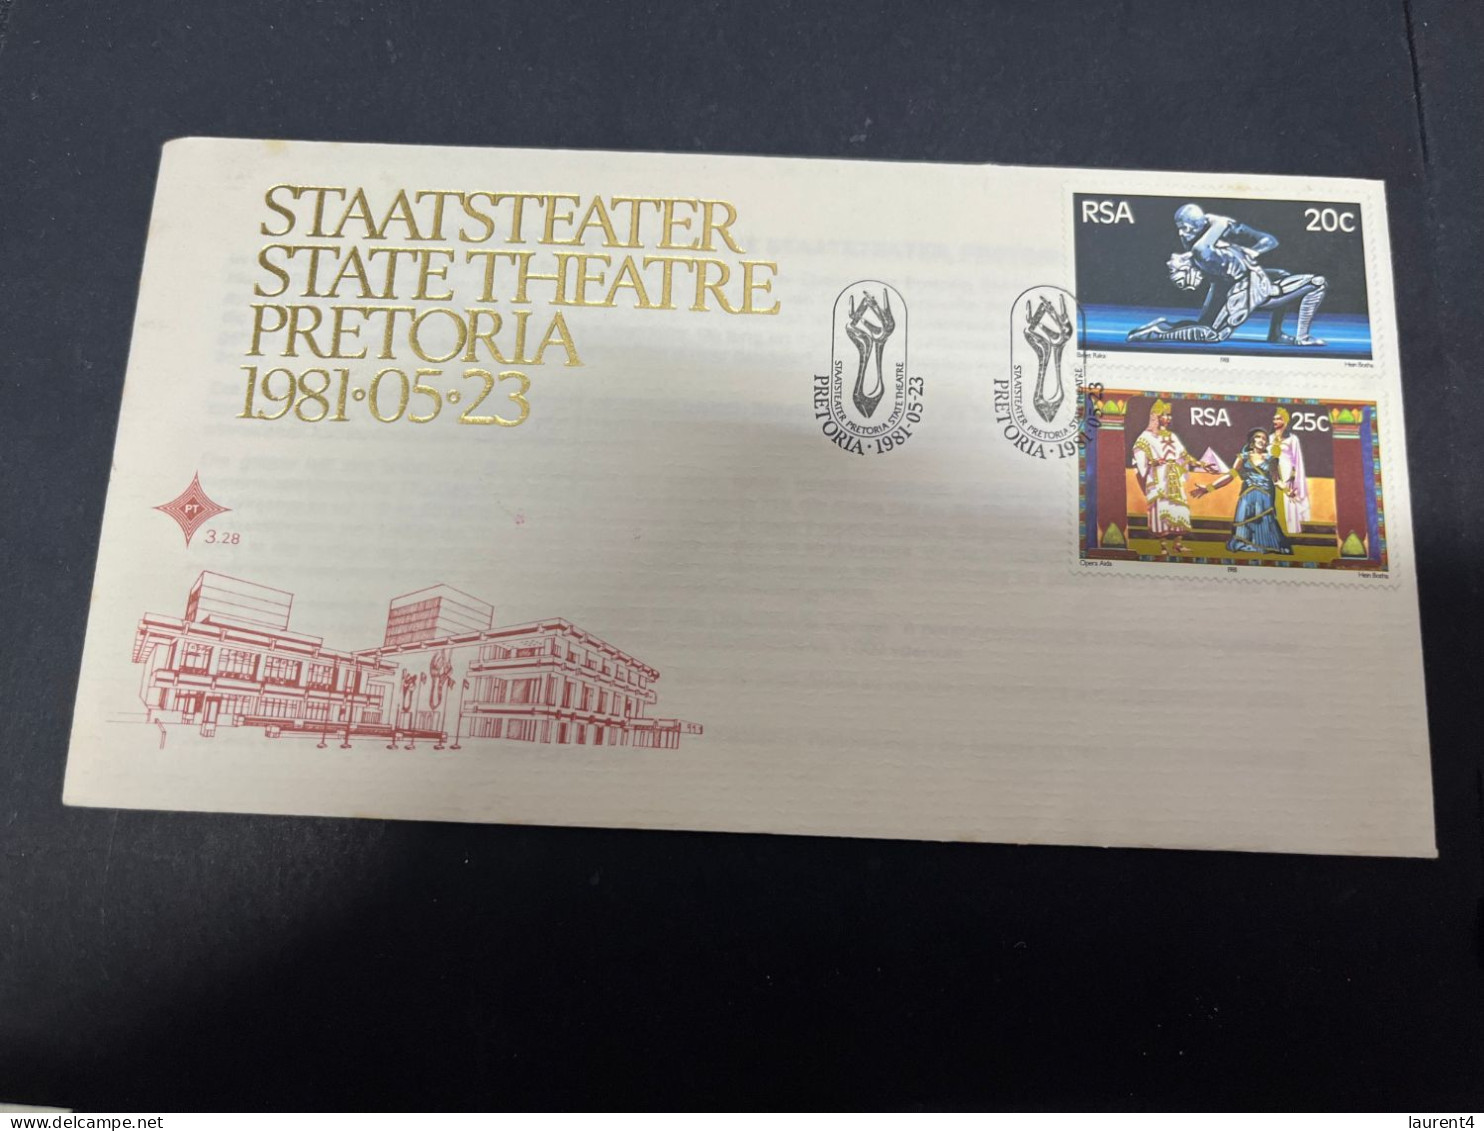 27-4-2024 (3 Z 14) FDC - South Africa (RSA) 1981 (states Theatre) (including Insert) - FDC